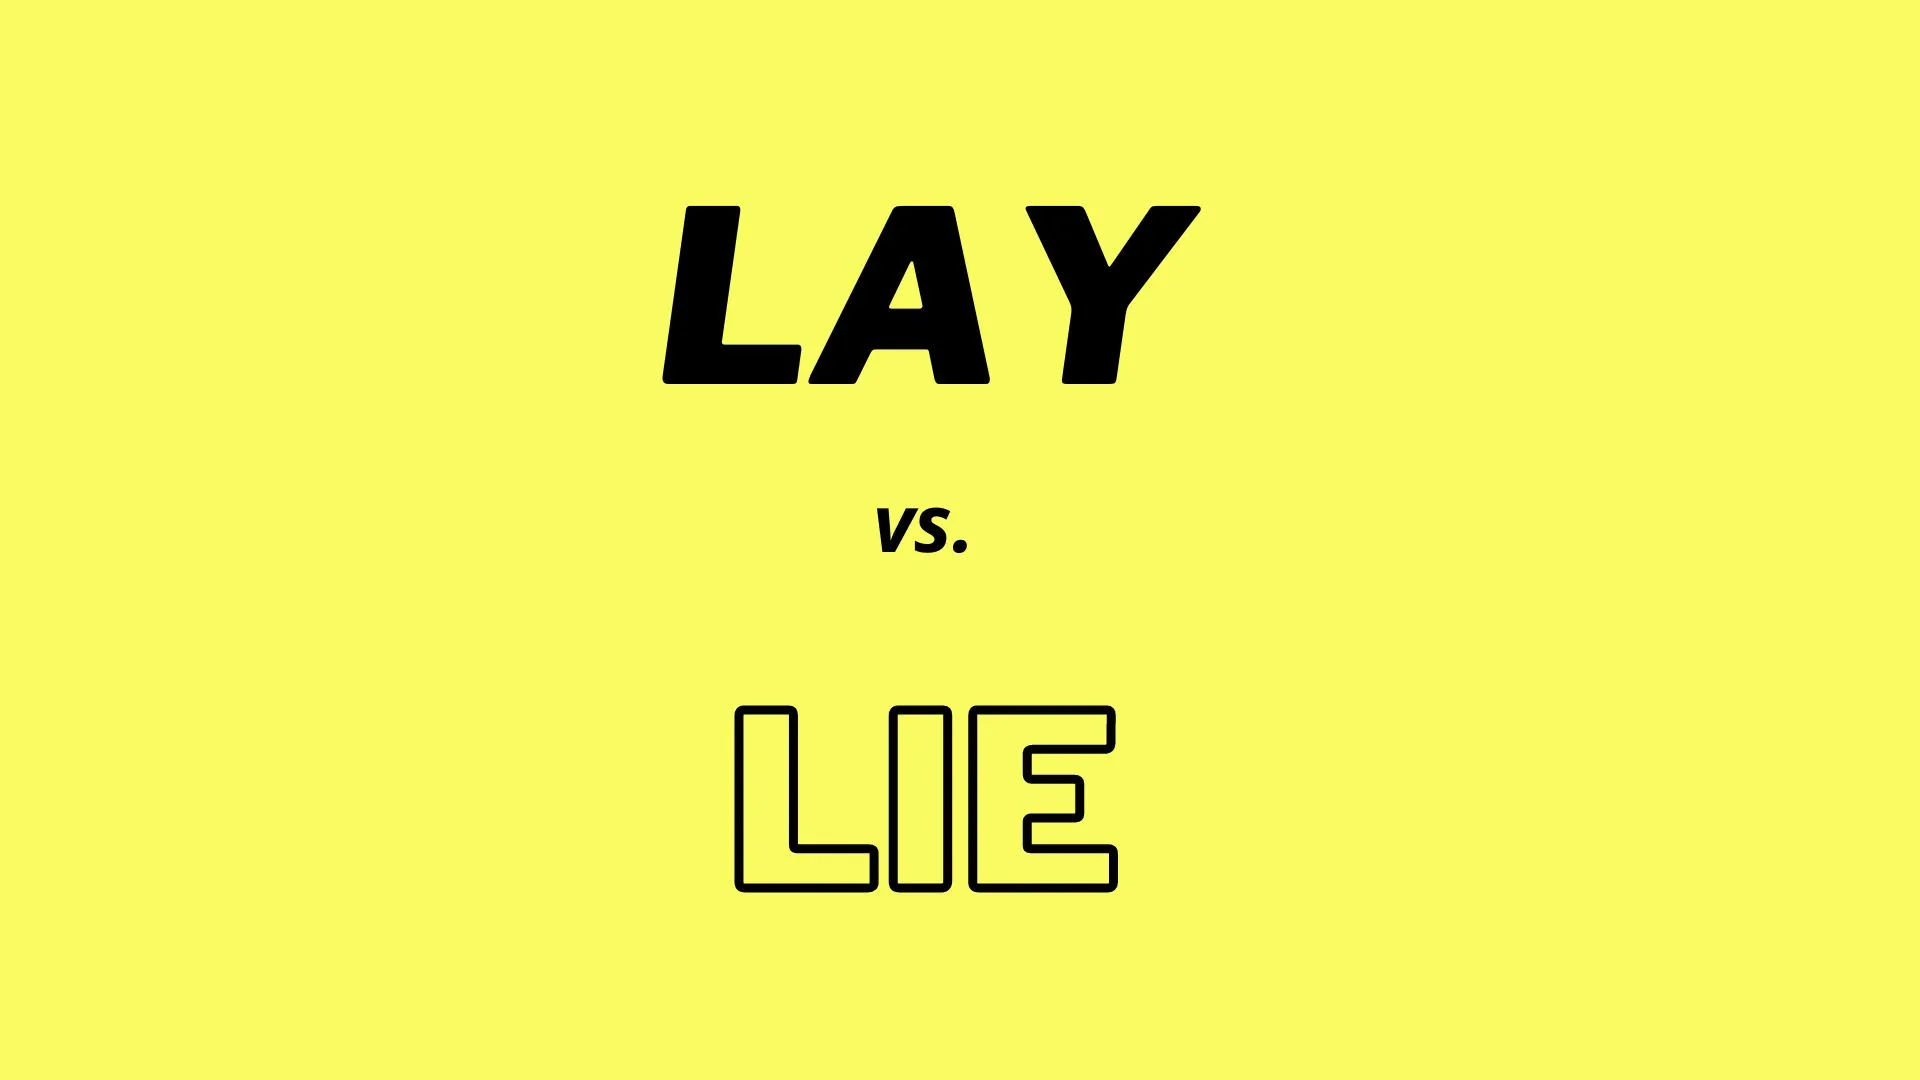 Visual comparison and definitions of words "lay" and "lie".